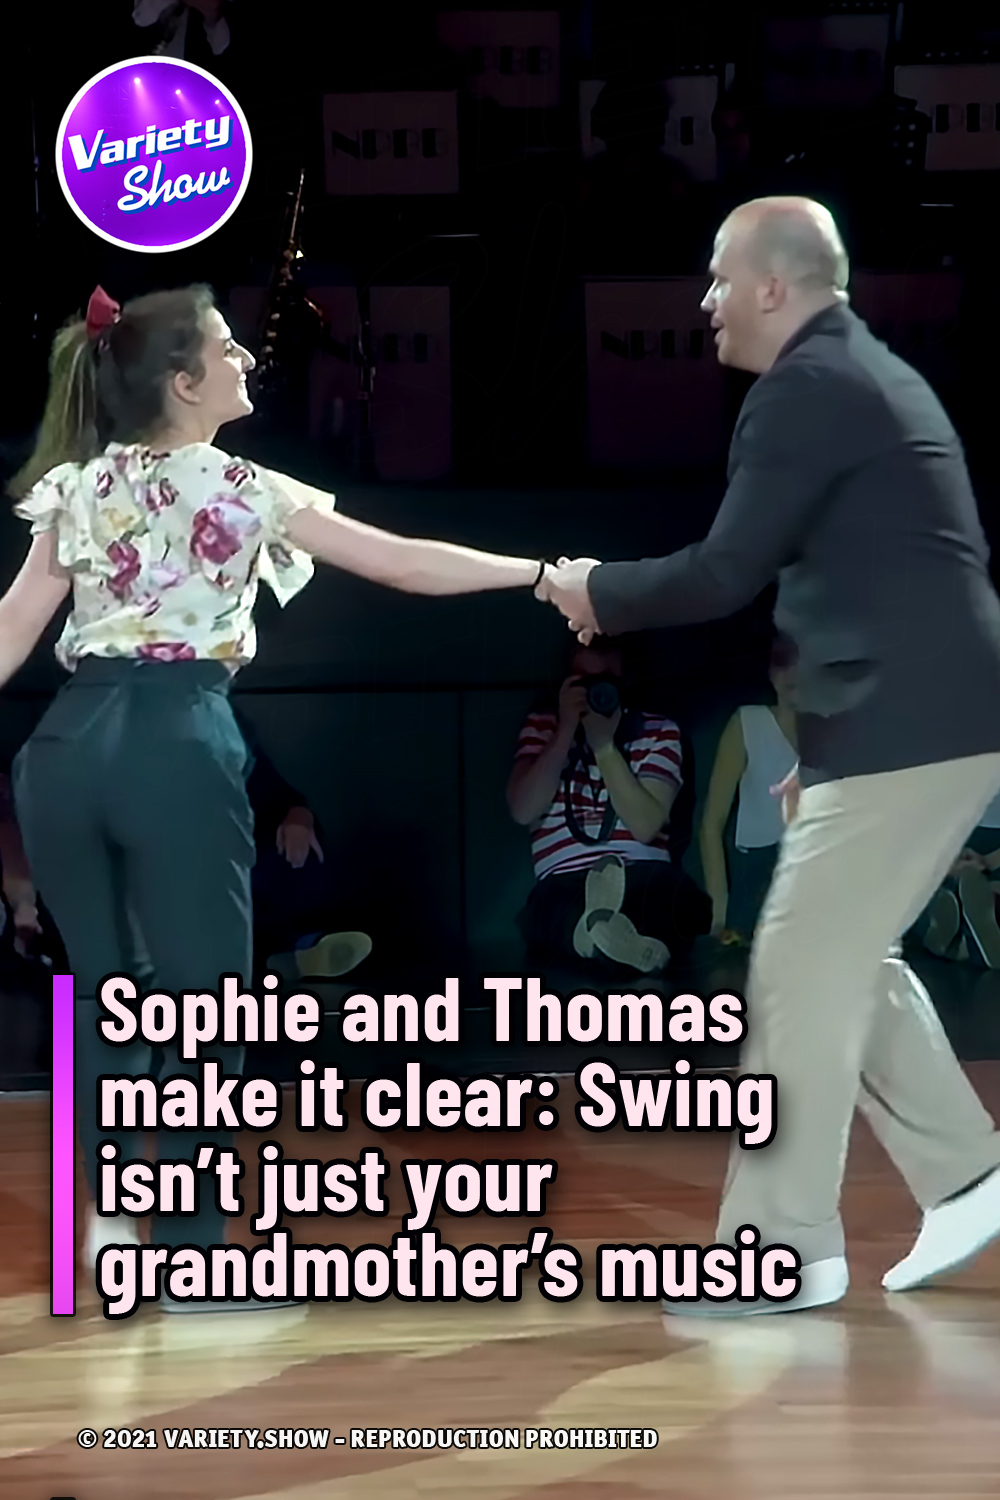 Sophie and Thomas make it clear: Swing isn’t just your grandmother’s music